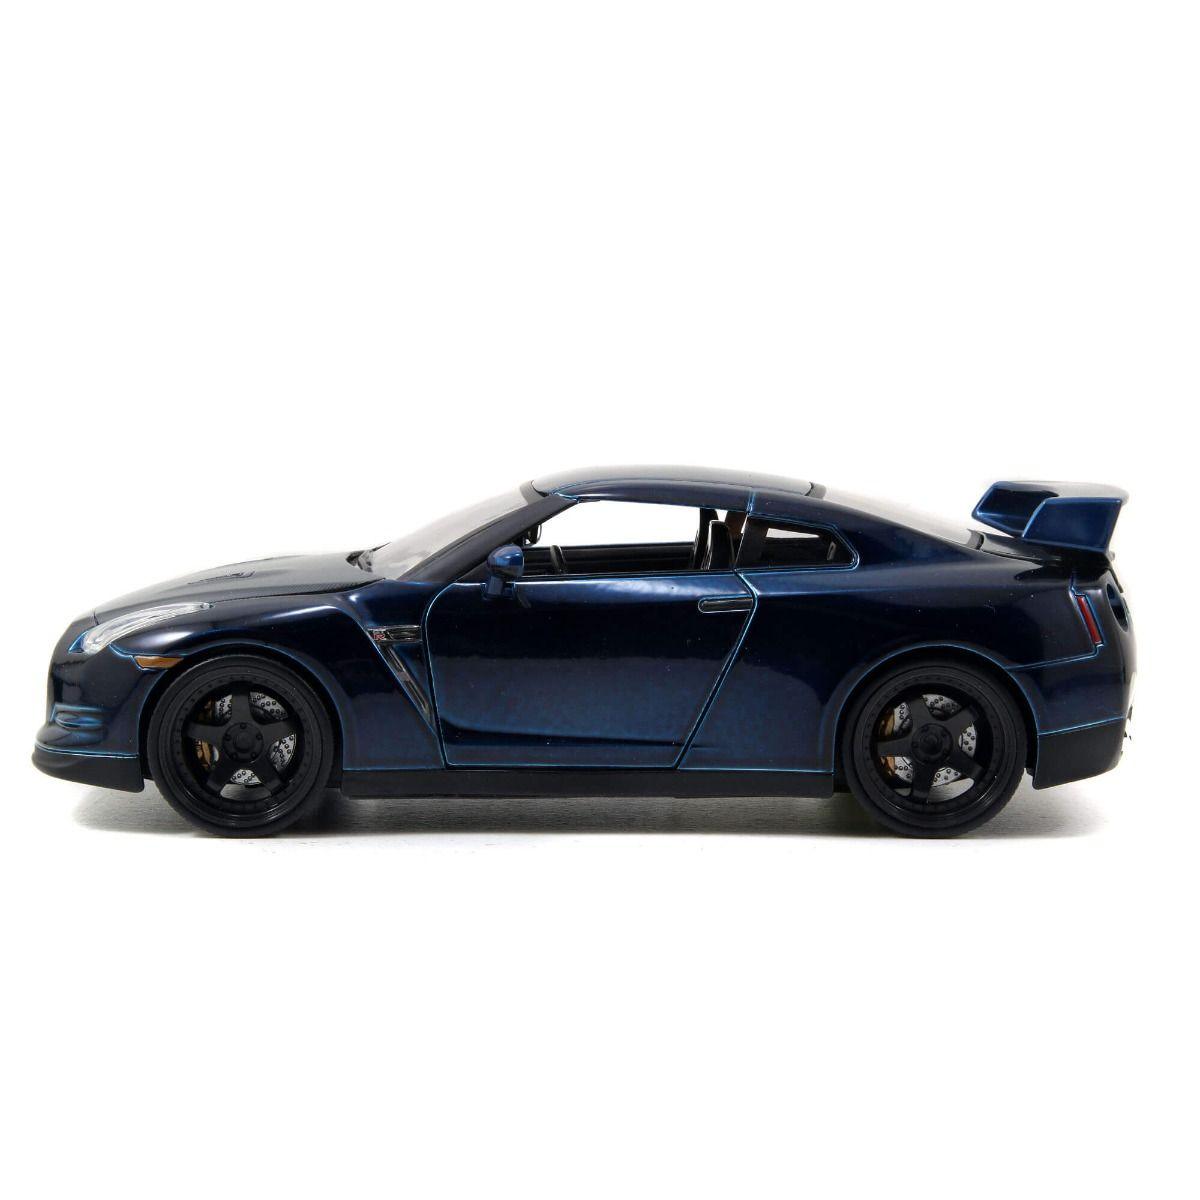 Fast and Furious - Brian's 2009 Nissan GT-R (R35) 1:24 Scale Hollywood Ride Jada Toys Titan Pop Culture